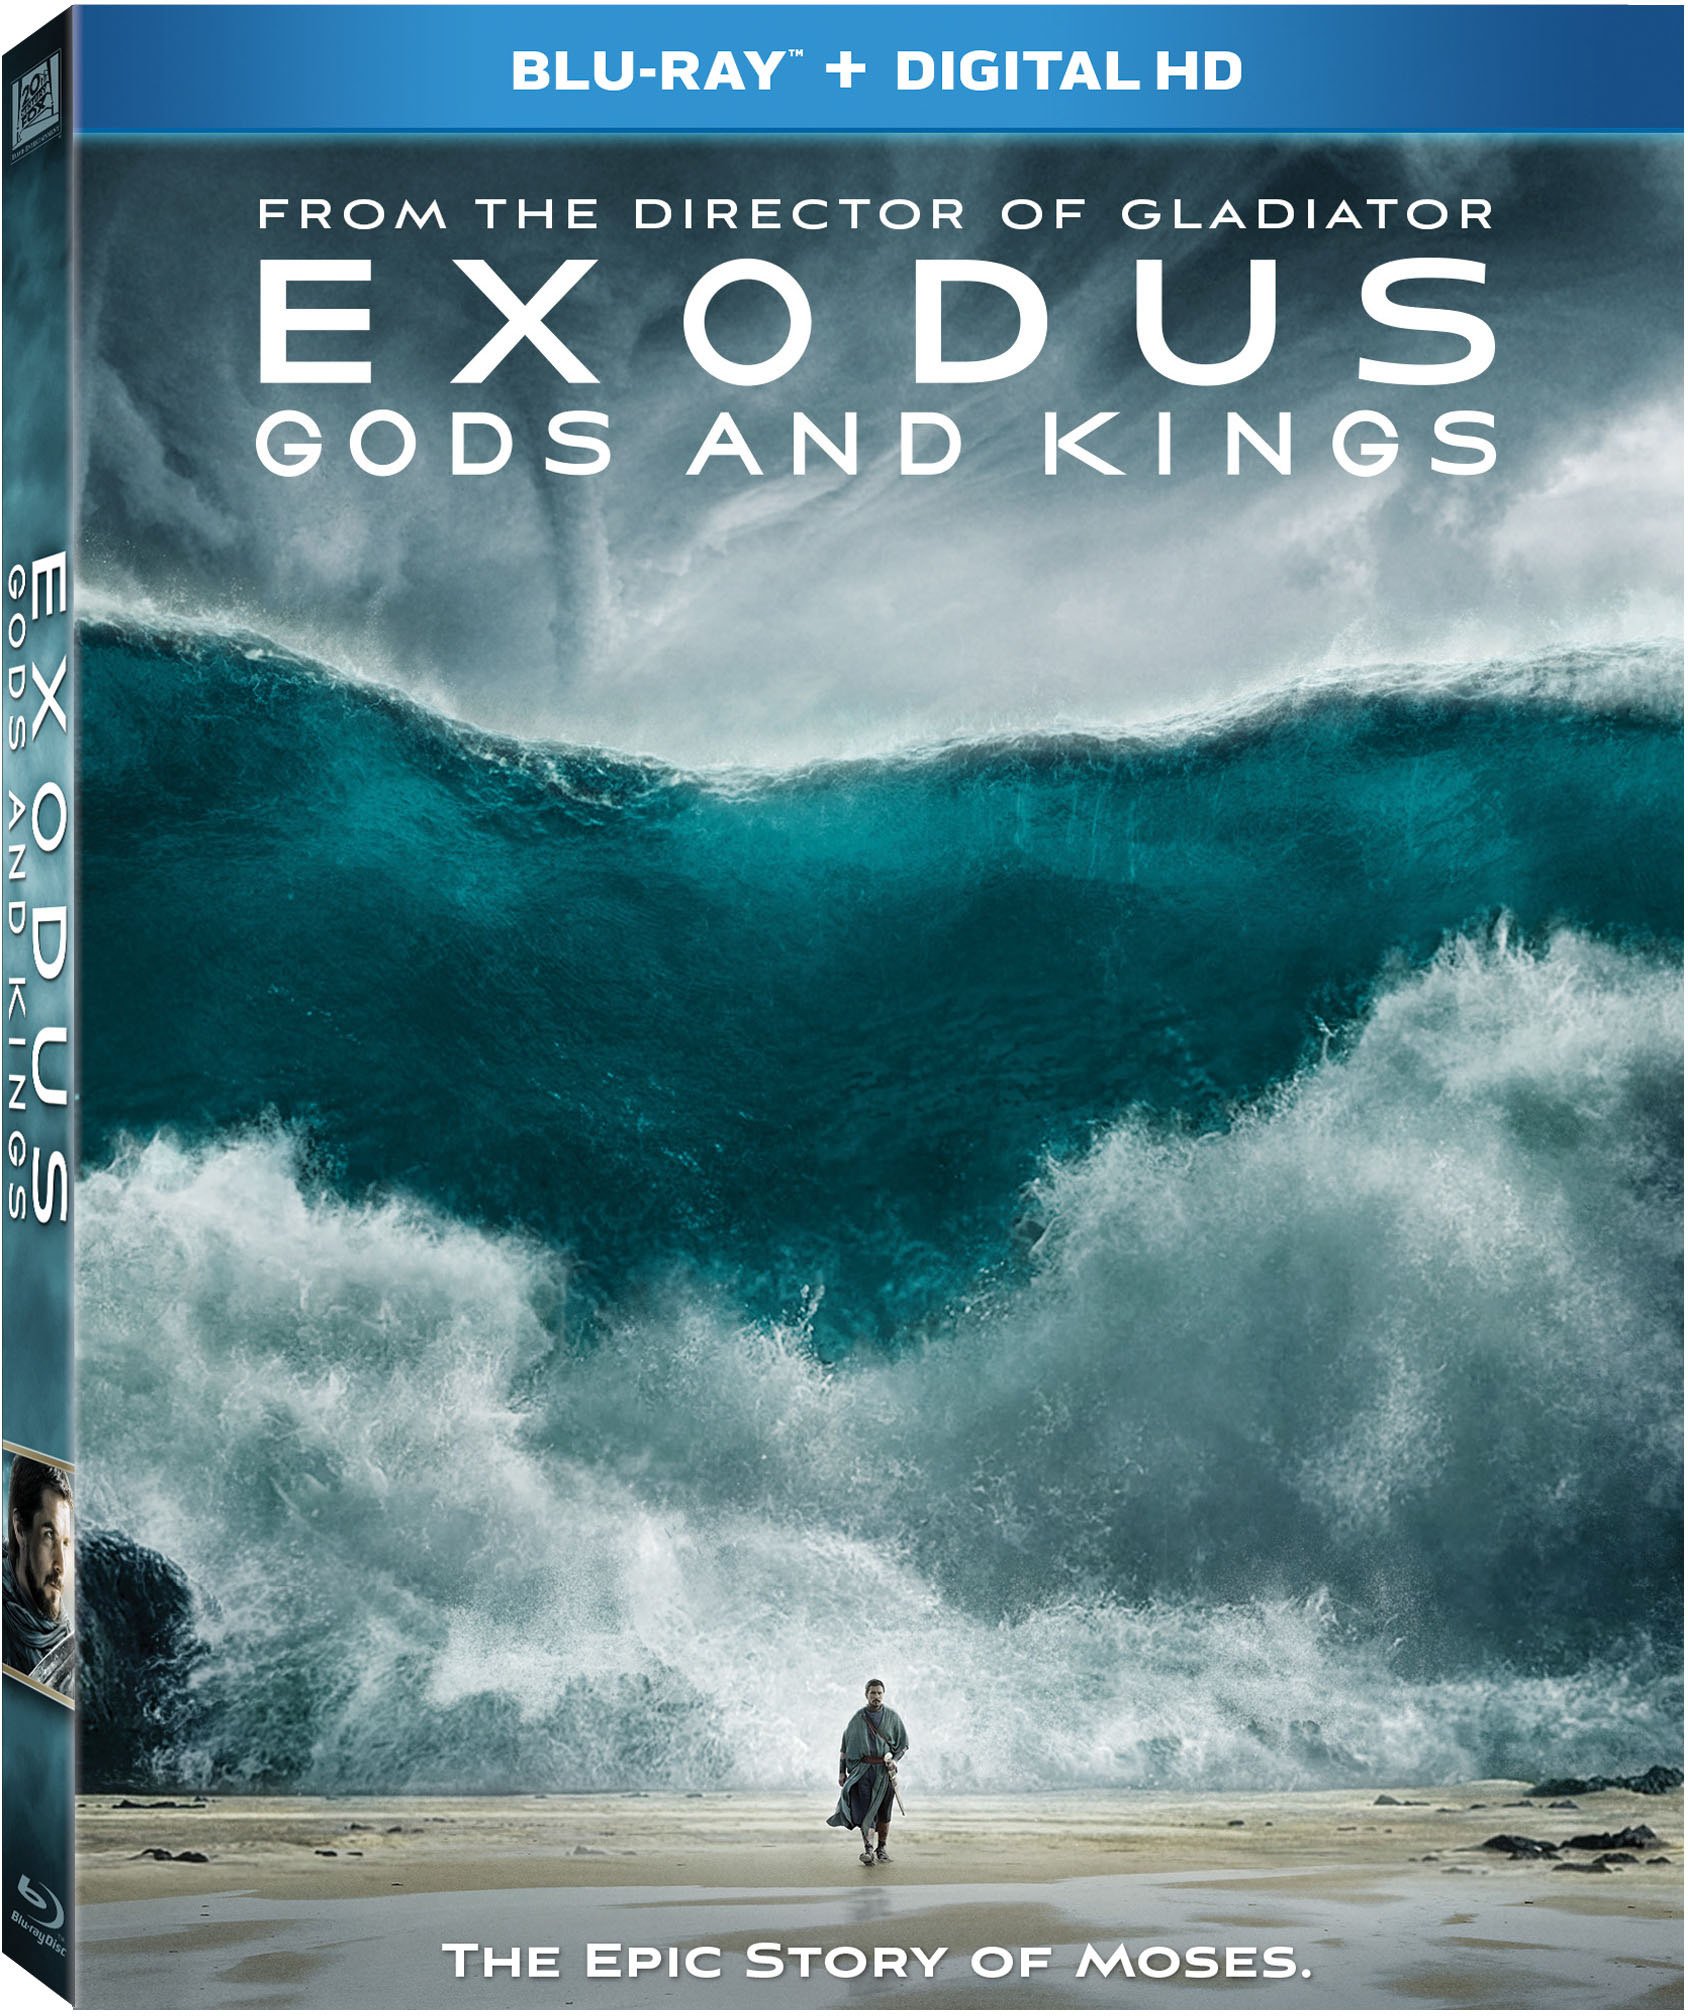 Exodus: Gods and Kings DVD Release Date March 17, 20151688 x 2016